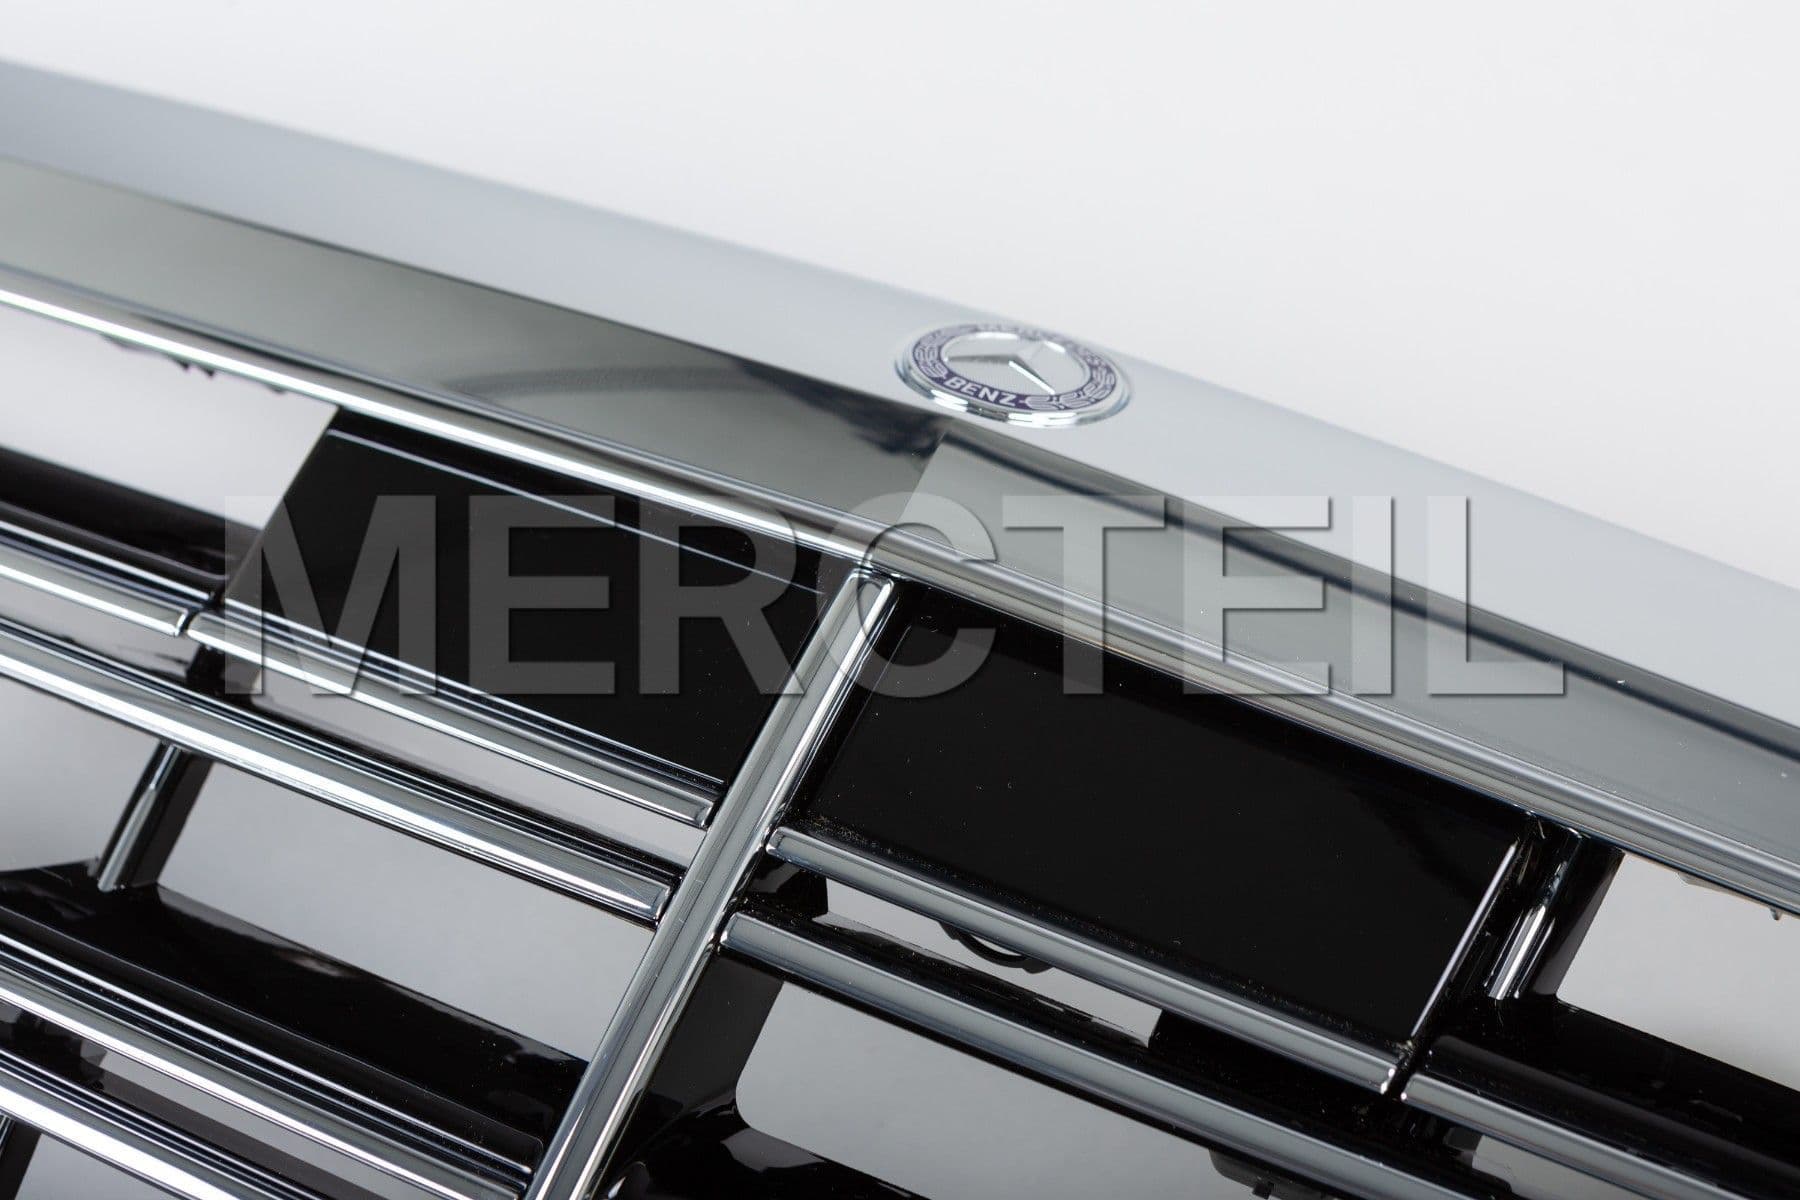 Maybach/S600 Radiator Grille (Double Lamella) for S-Class (part number: A22288017839040)